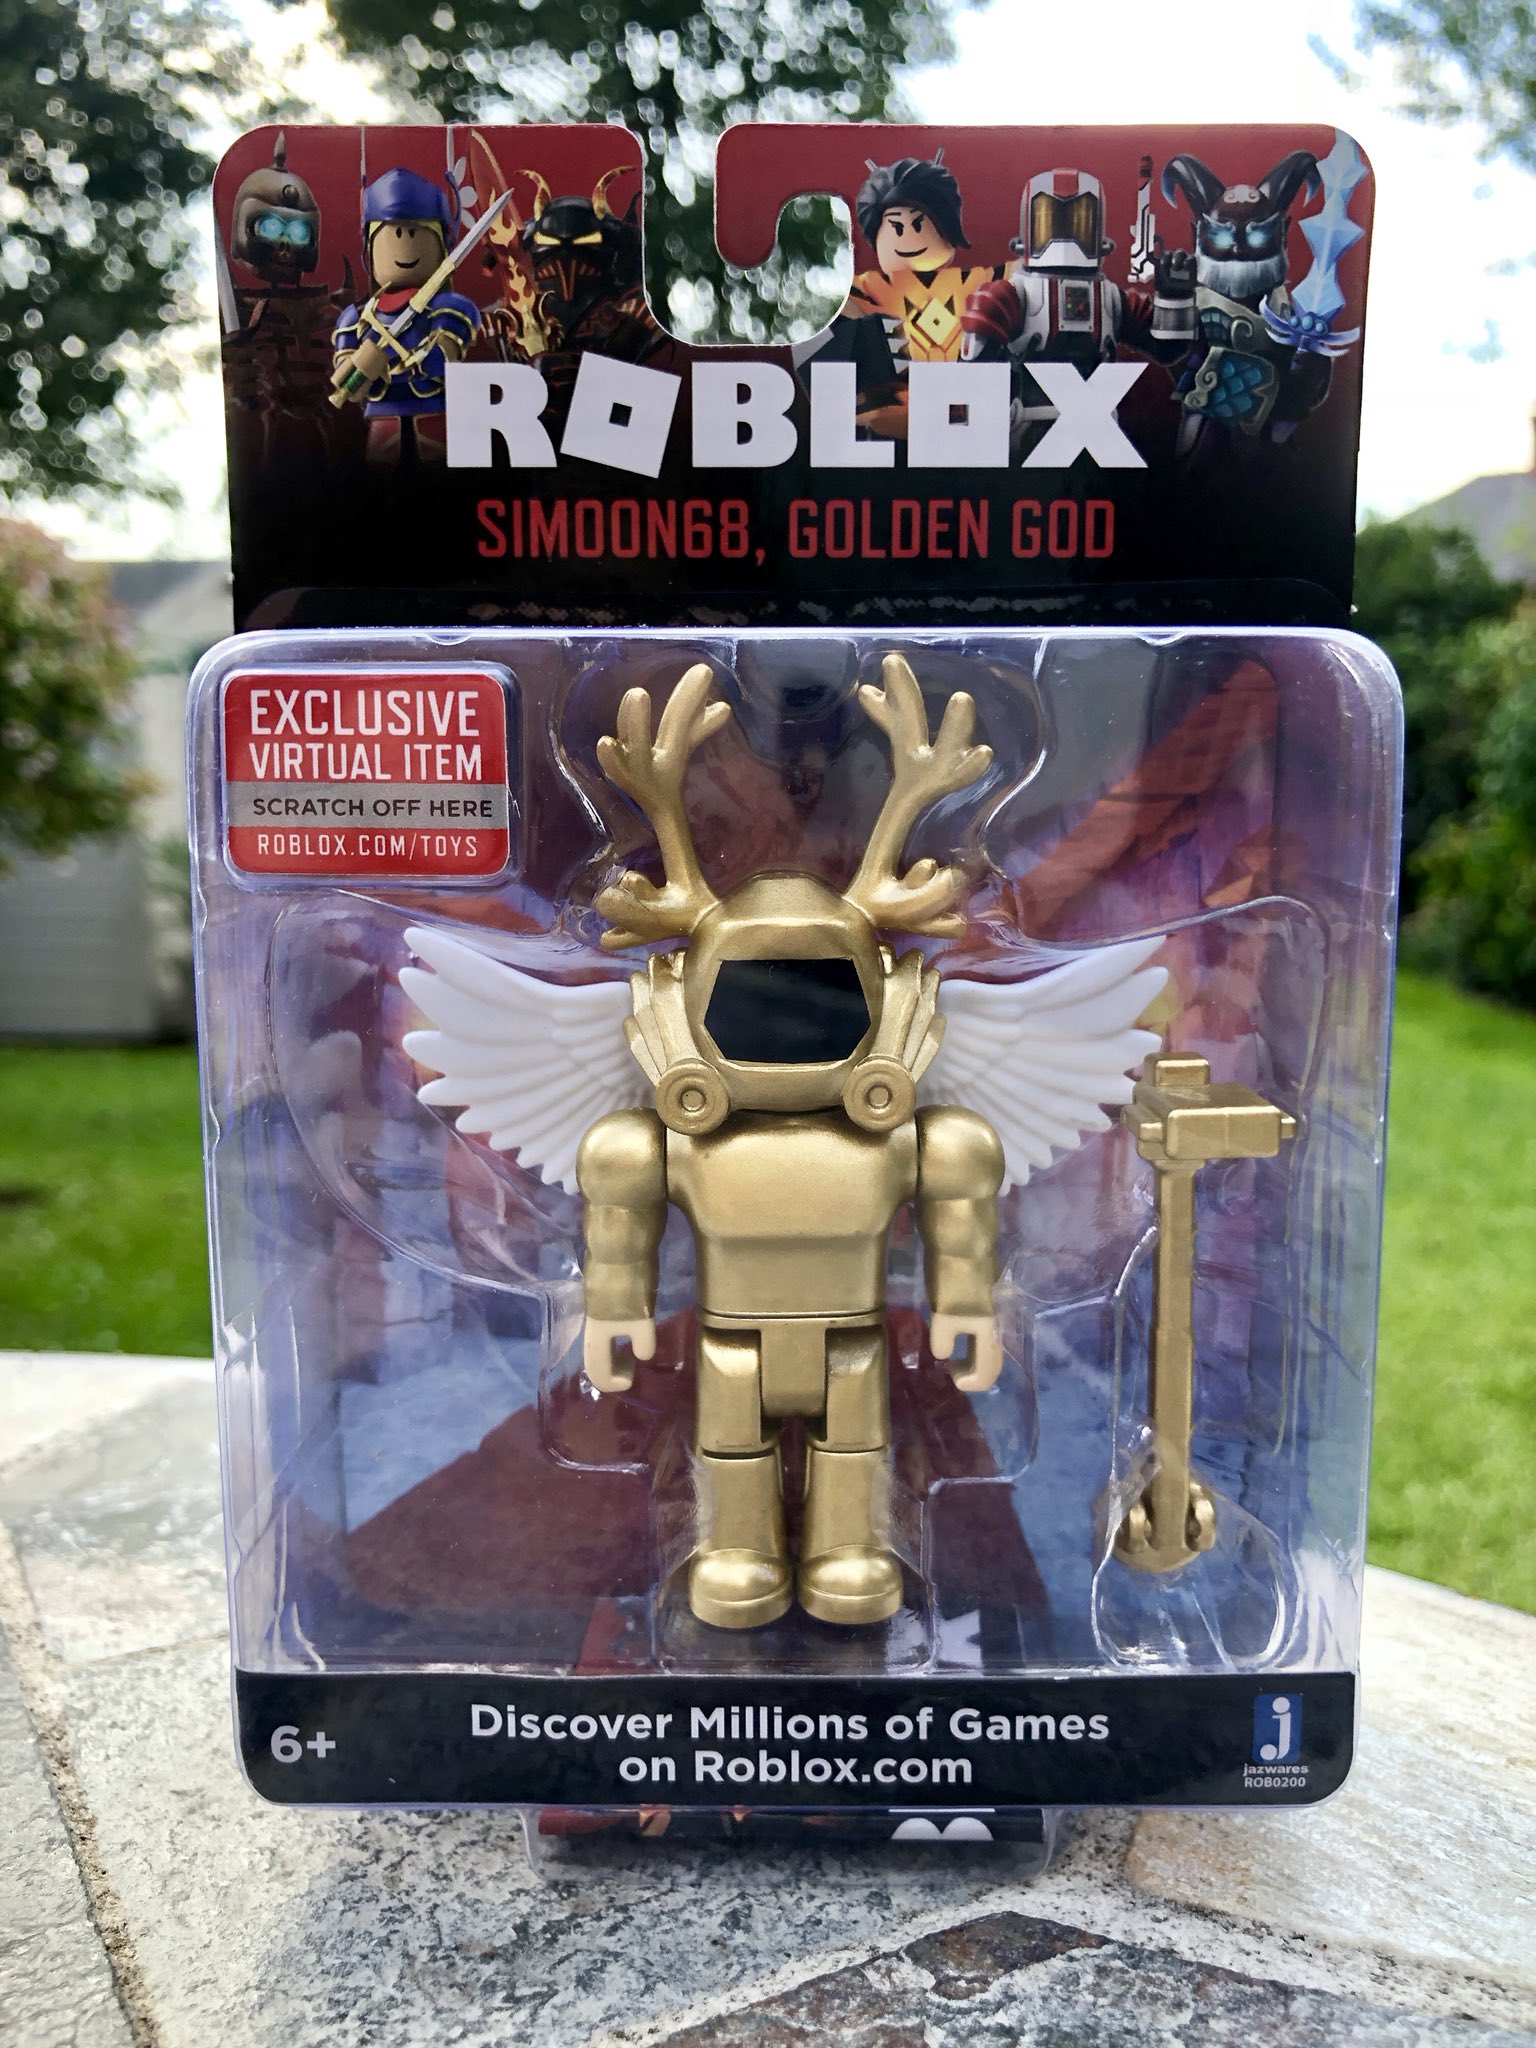 Simon On Twitter I Ve Just Unboxed Myself - roblox toys golden god